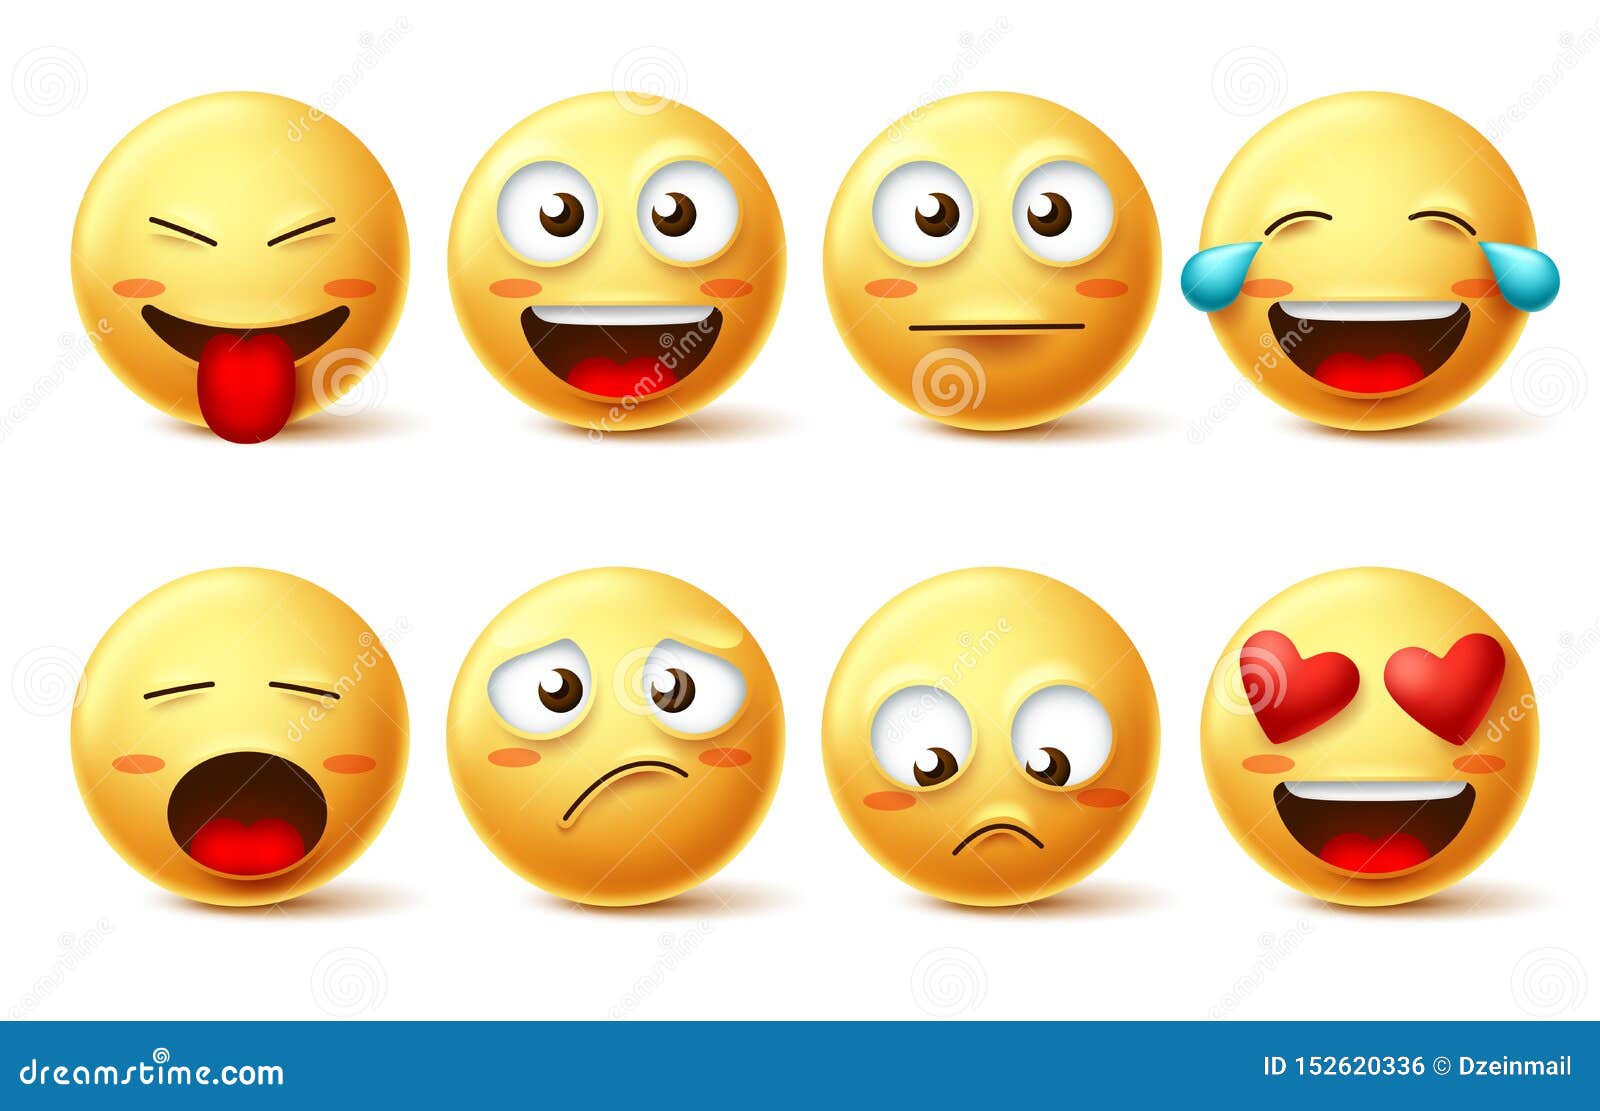 smileys  icon set. emoticons and funny smiley face with happy, sad, inlove and naughty facial expressions